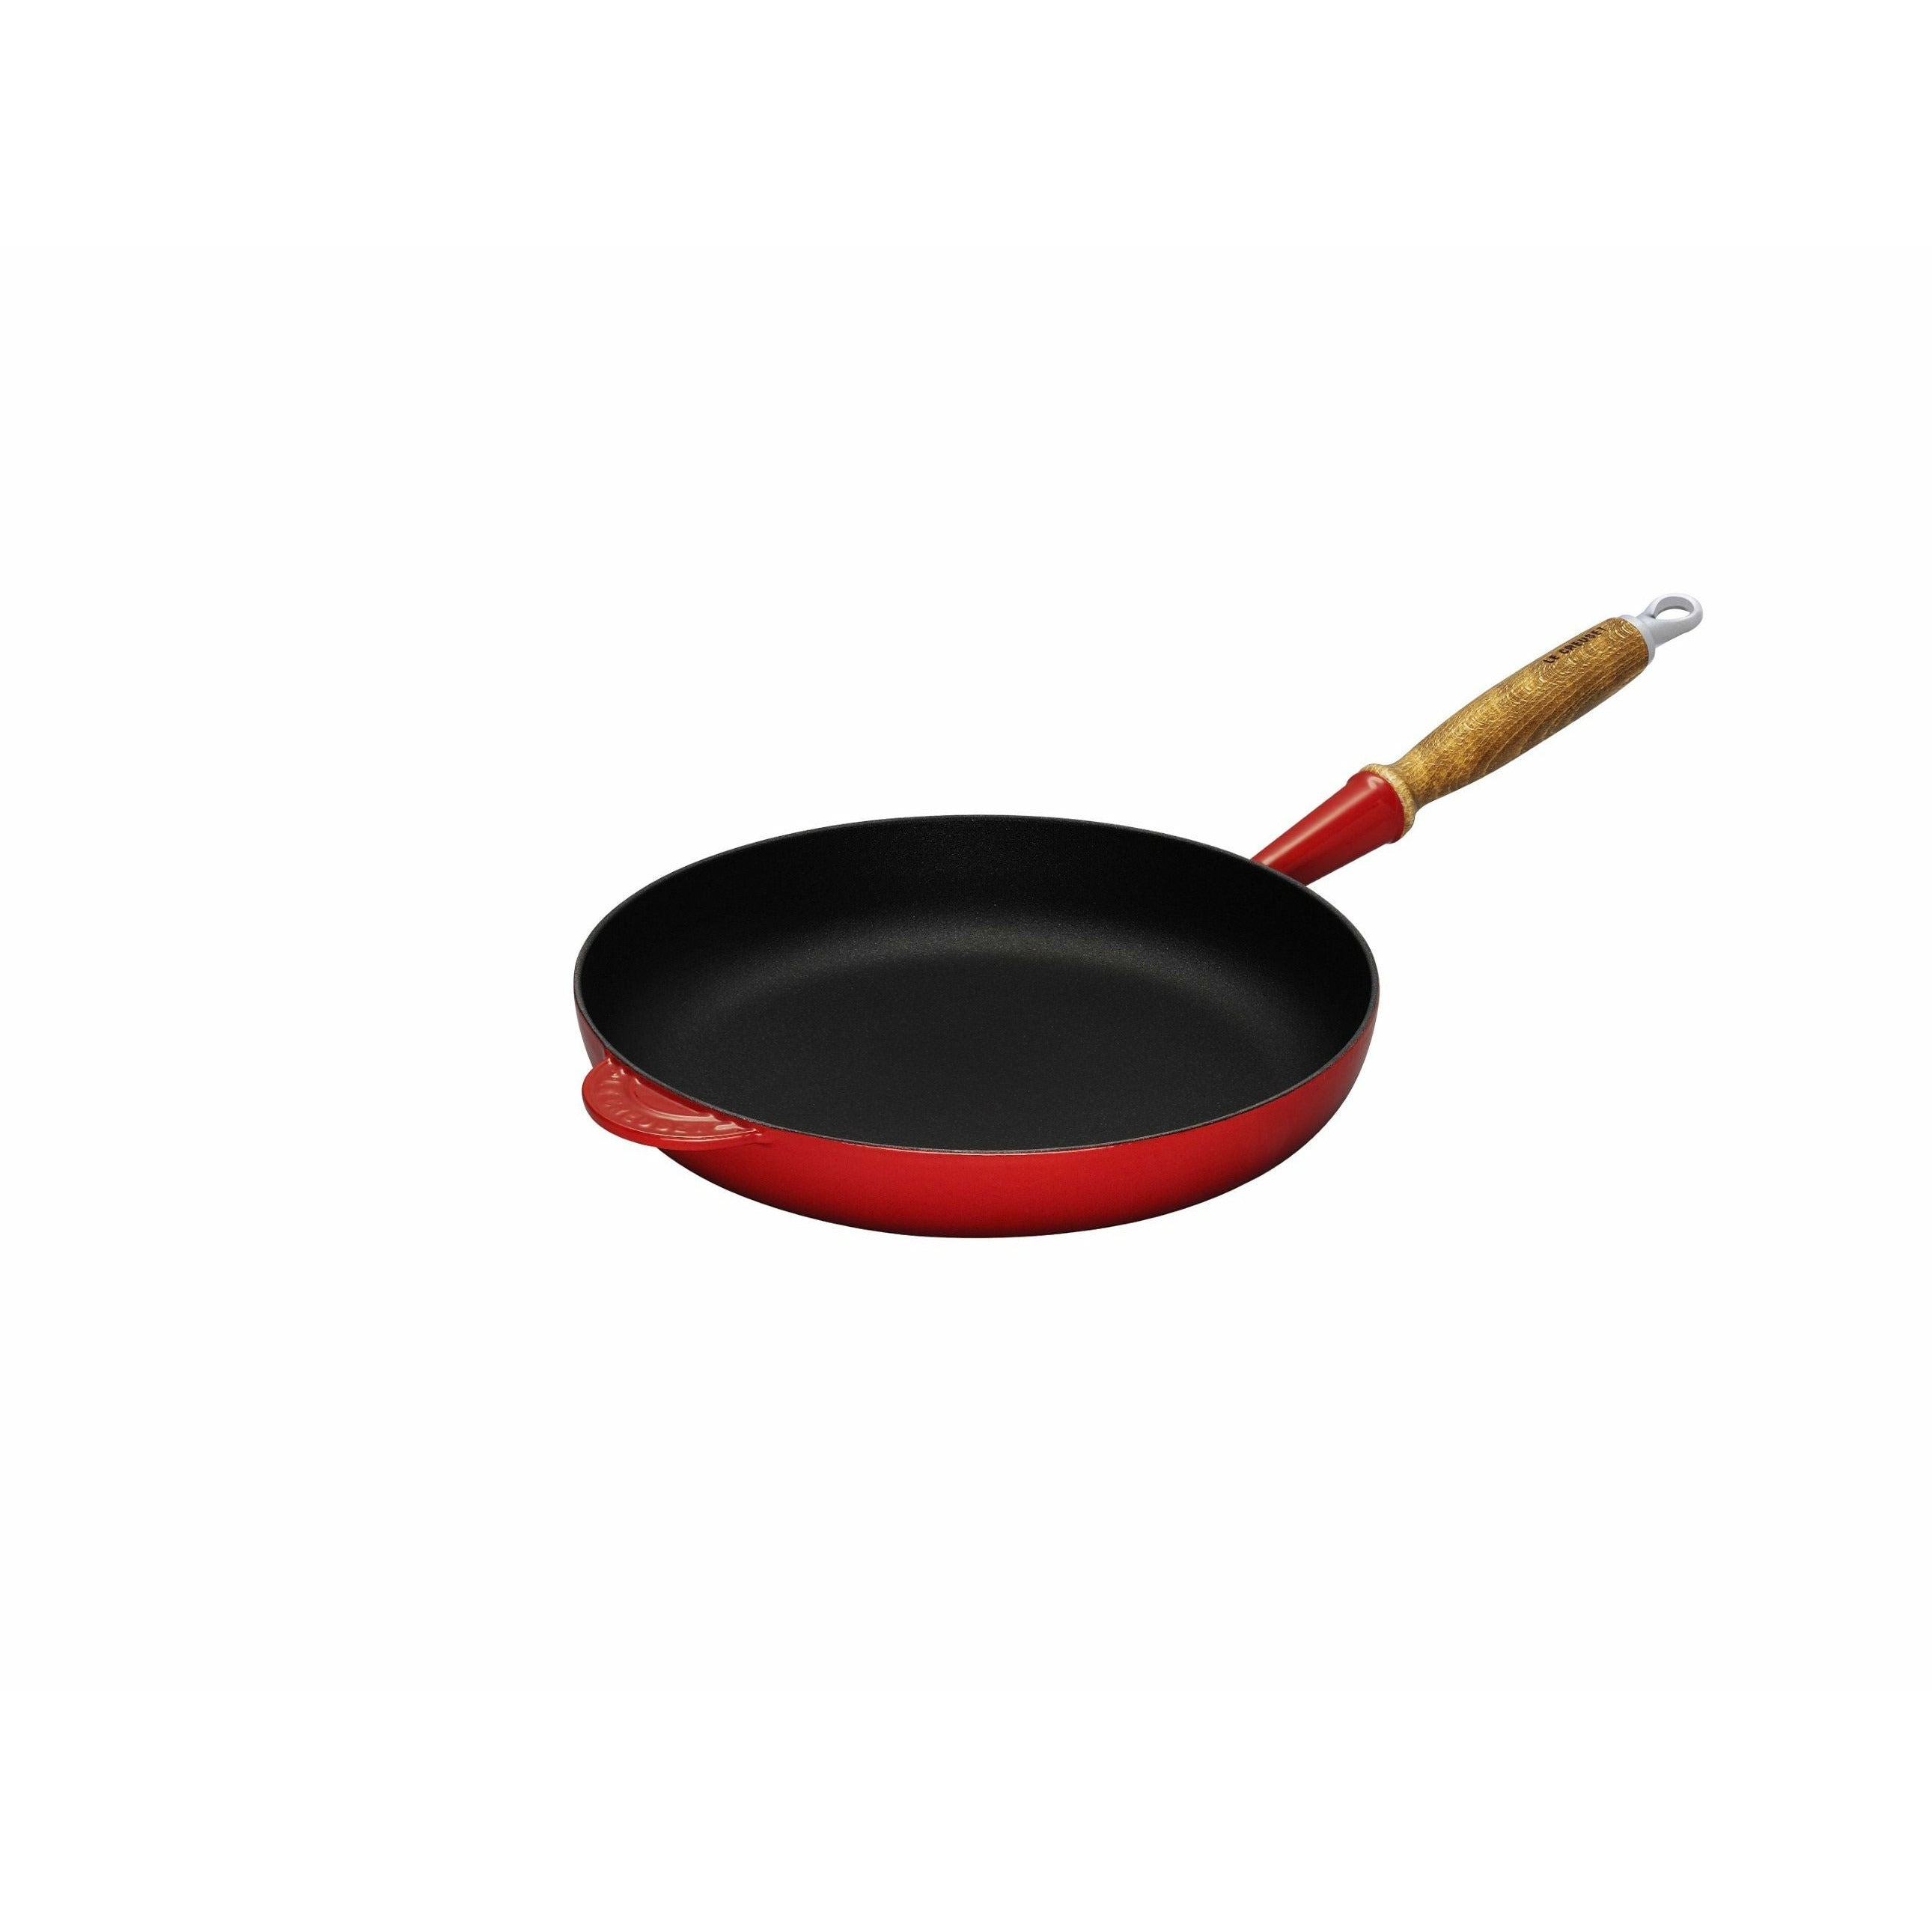 Le Creuset Tradition Frying Pan With Wooden Handle 26 Cm, Cherry Red